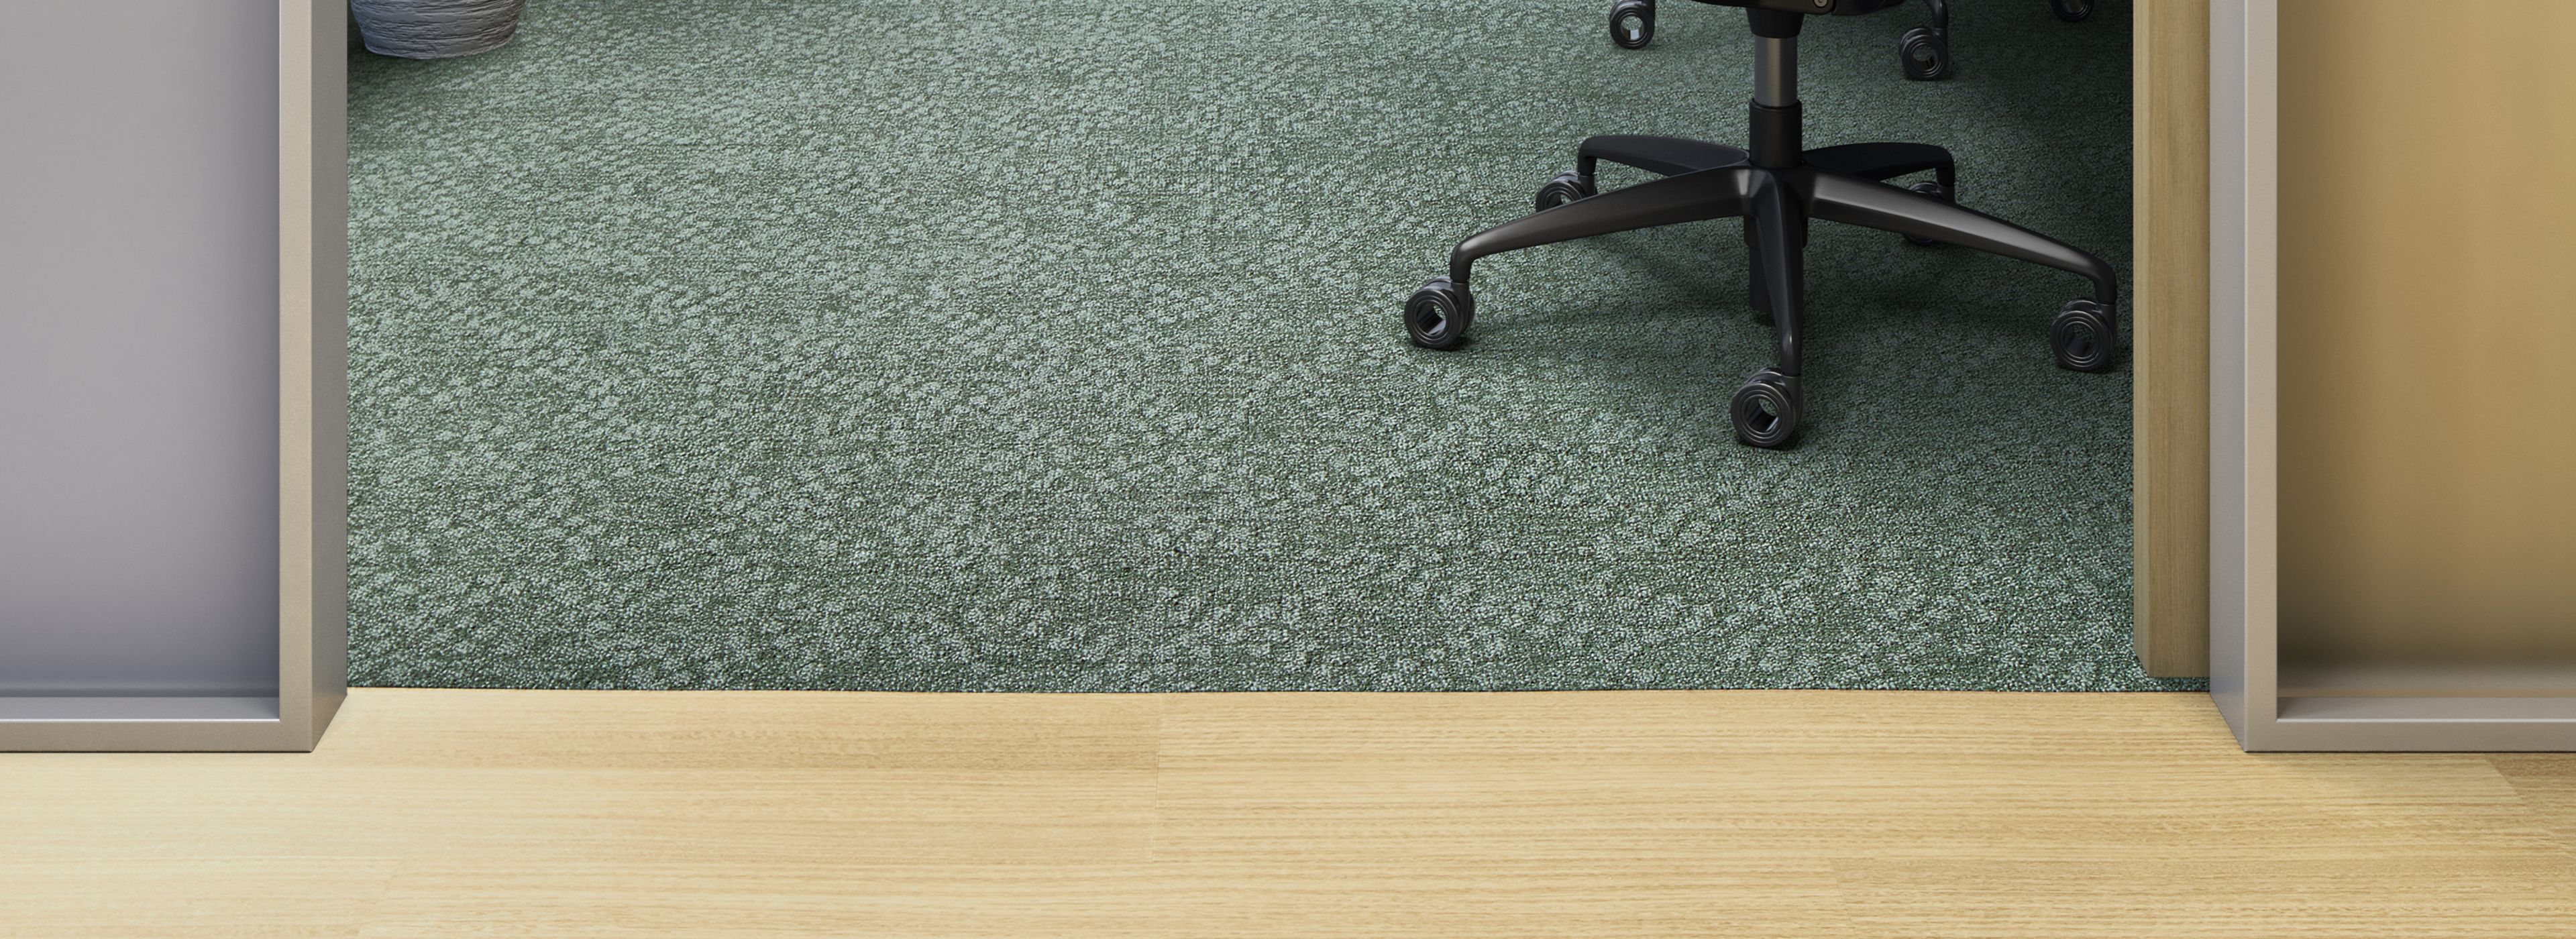 Interface Prickly as a Pear plank carpet tile in private office with Textured Woodgrains LVT in corridor imagen número 1